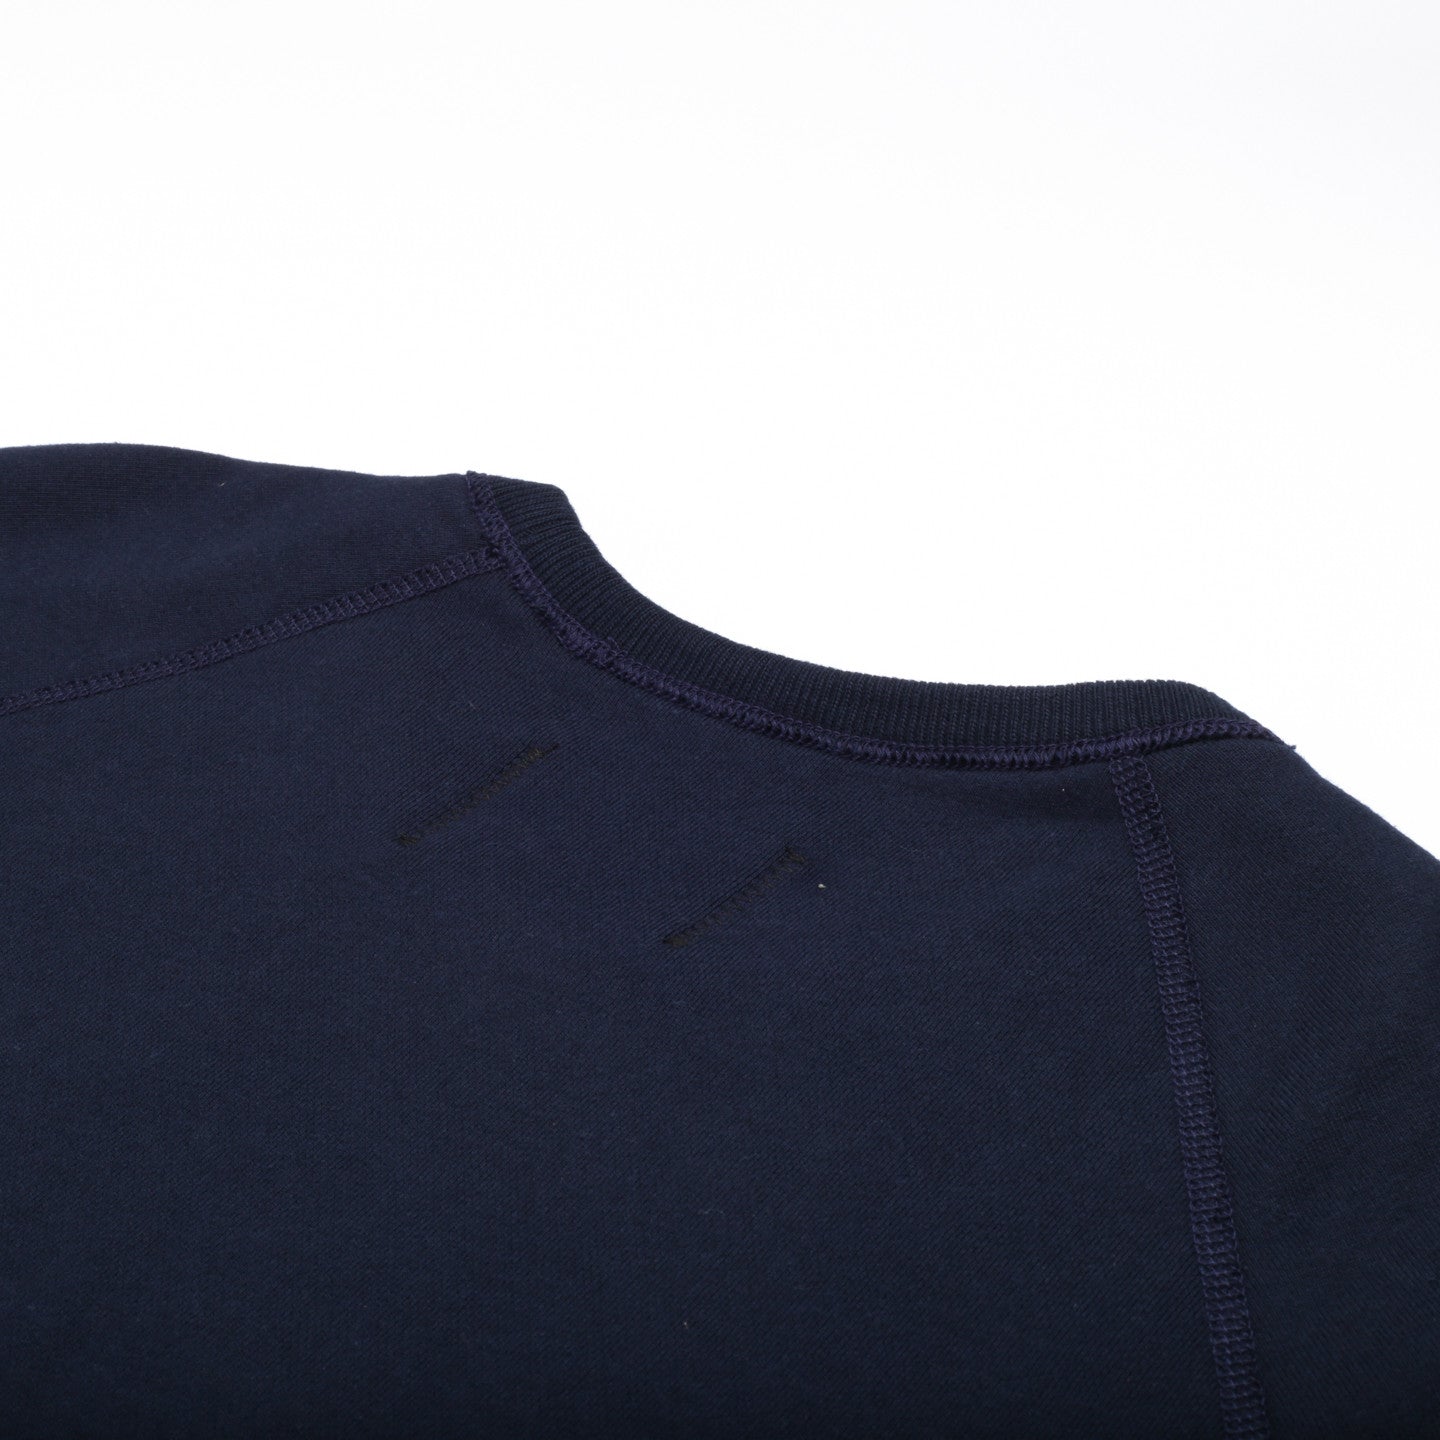 REIGNING CHAMP MIDWEIGHT TERRY CREWNECK NAVY